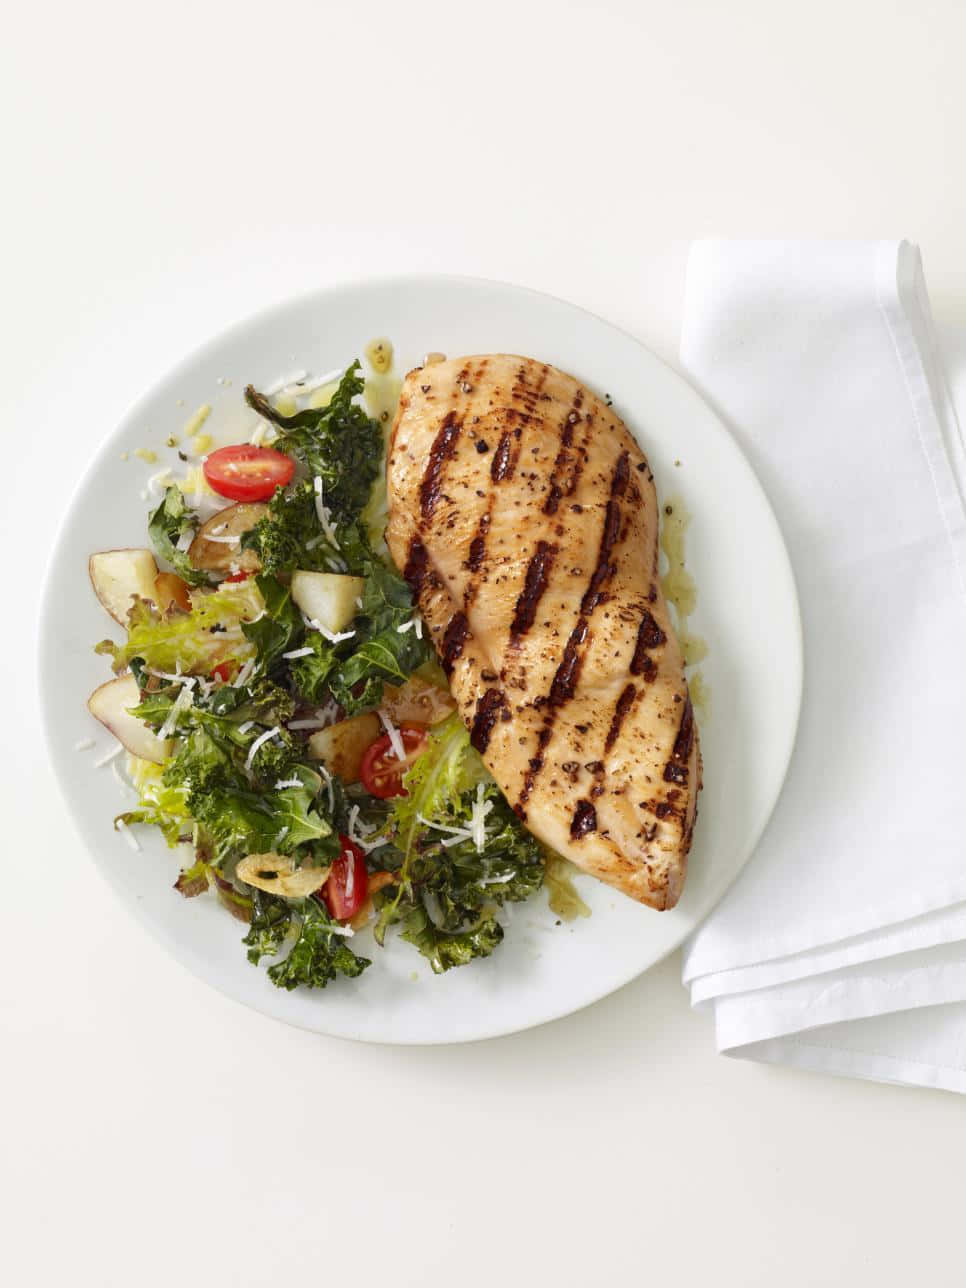 Healthy Food Grilled Salmon And Vegetables Picture